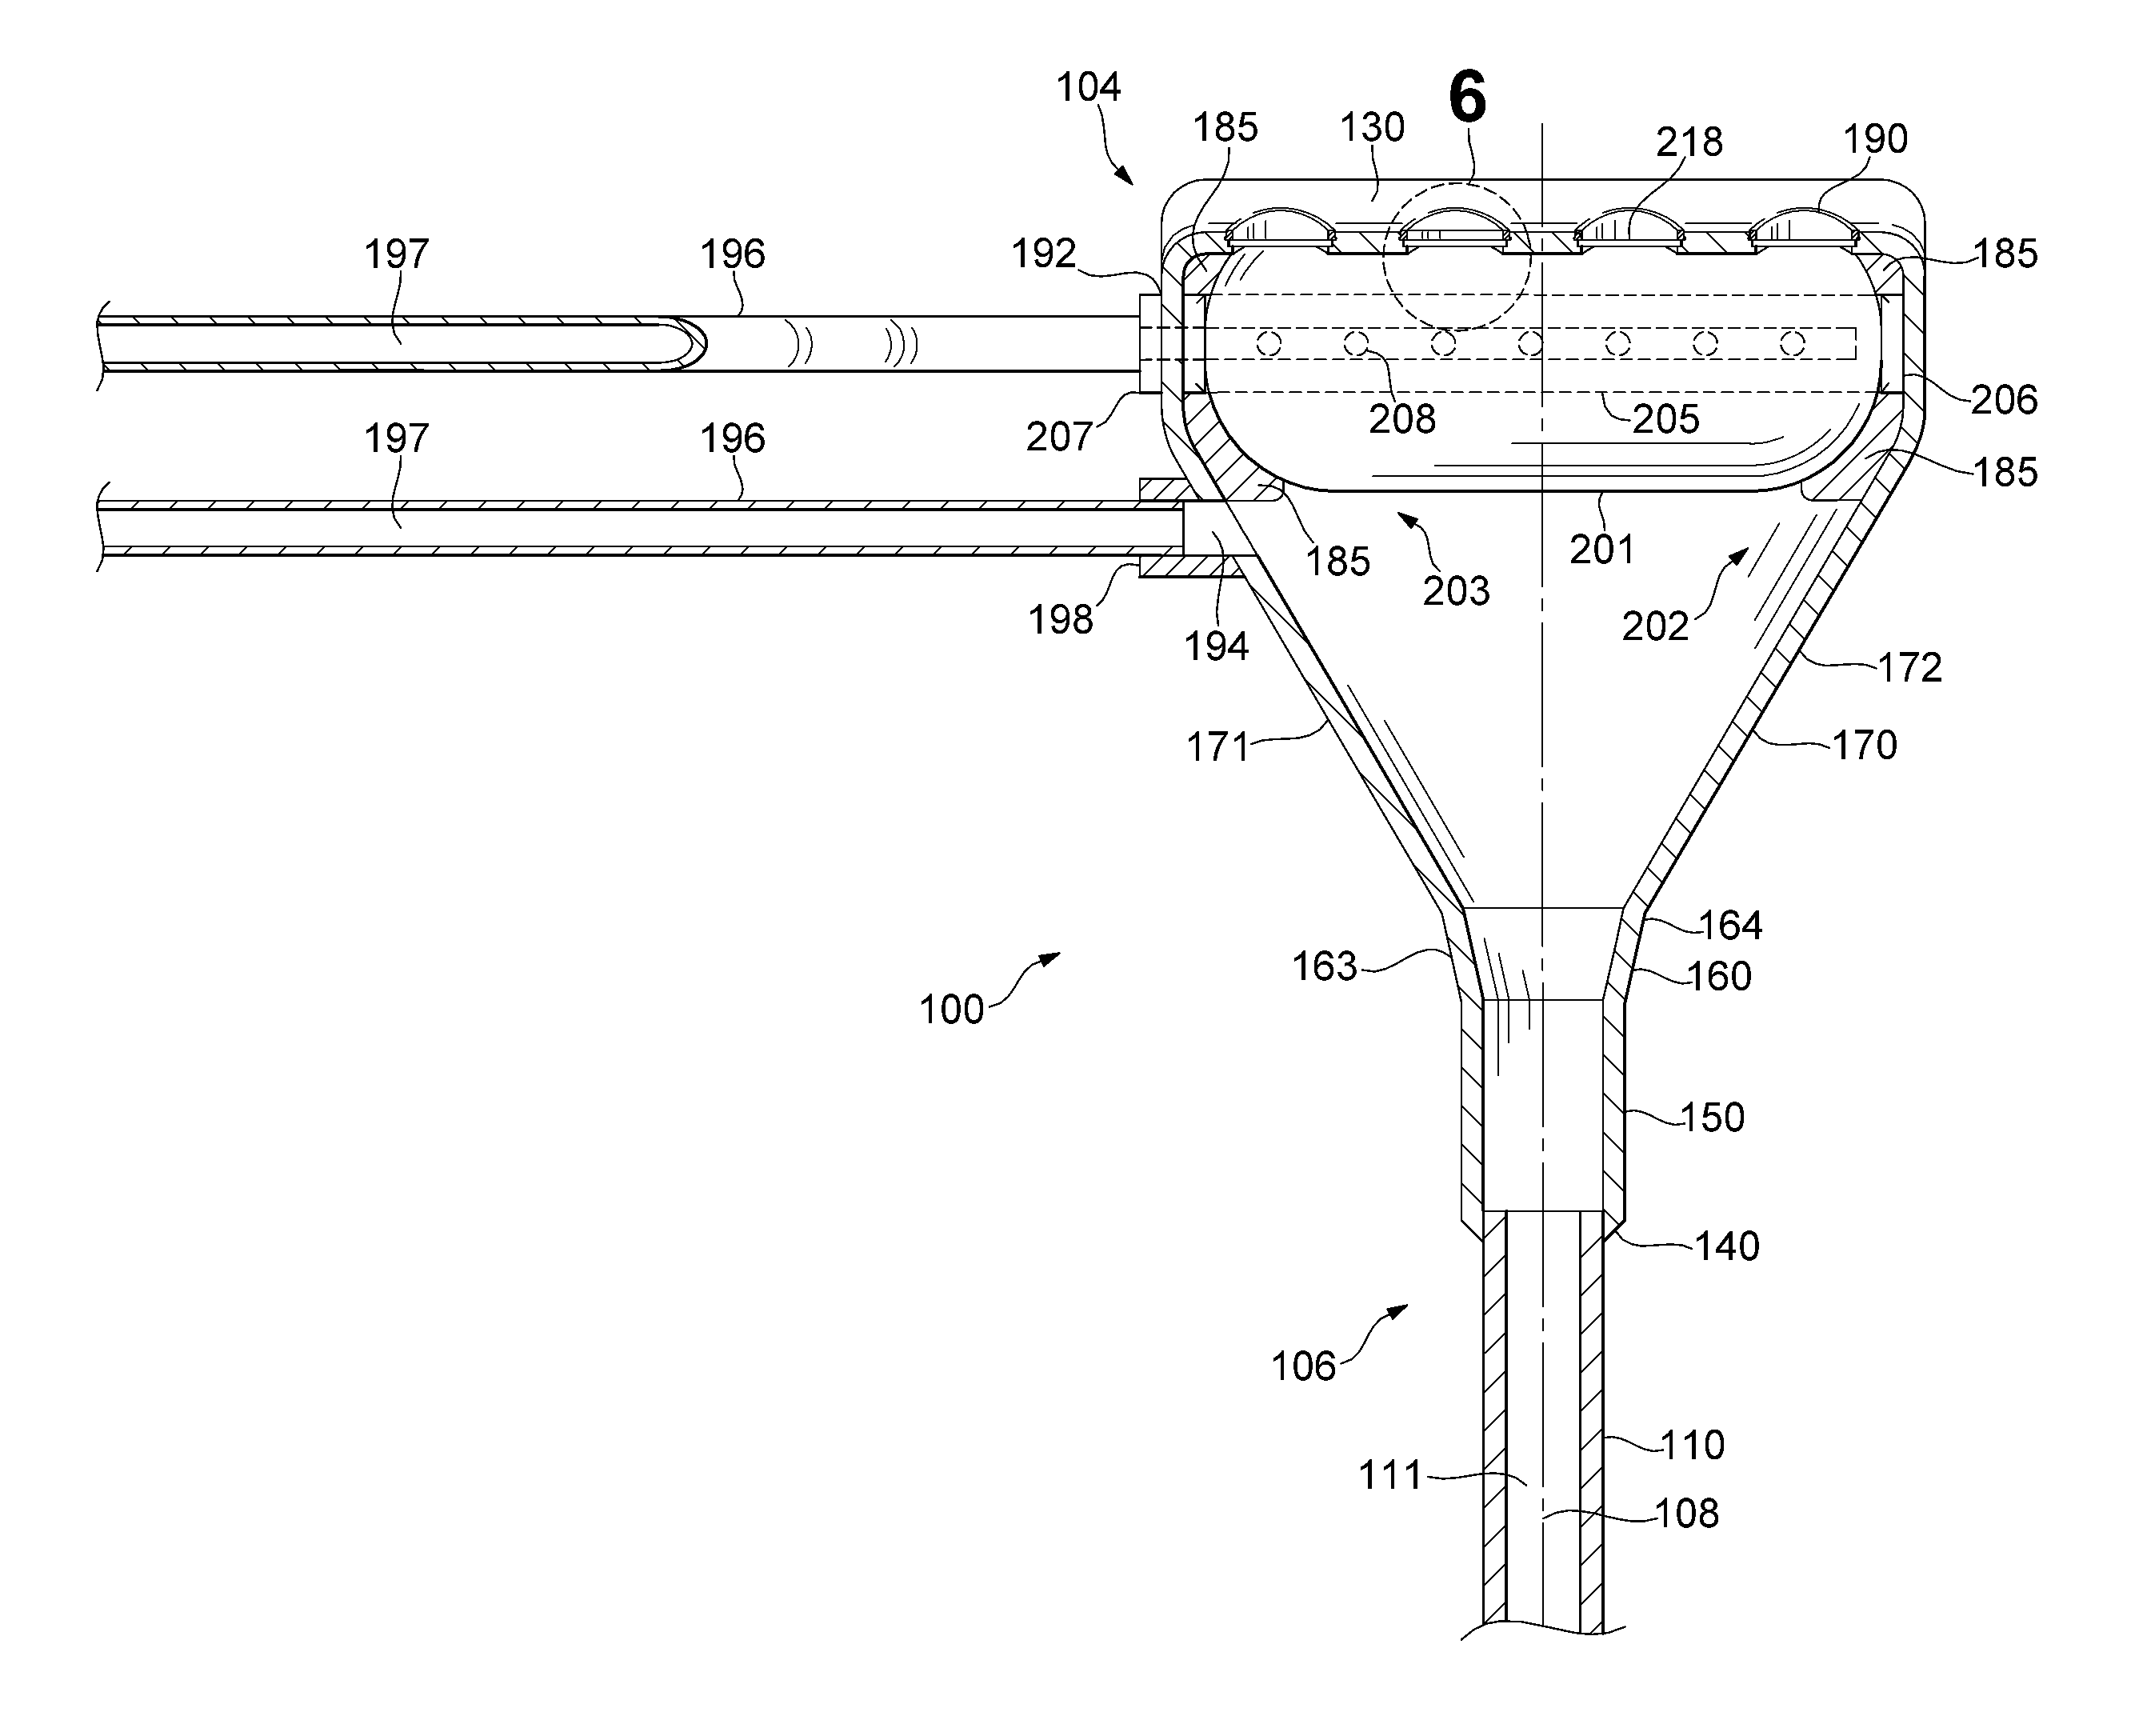 Medical Device with Multi-Port Inflatable Hemostatic Valve System